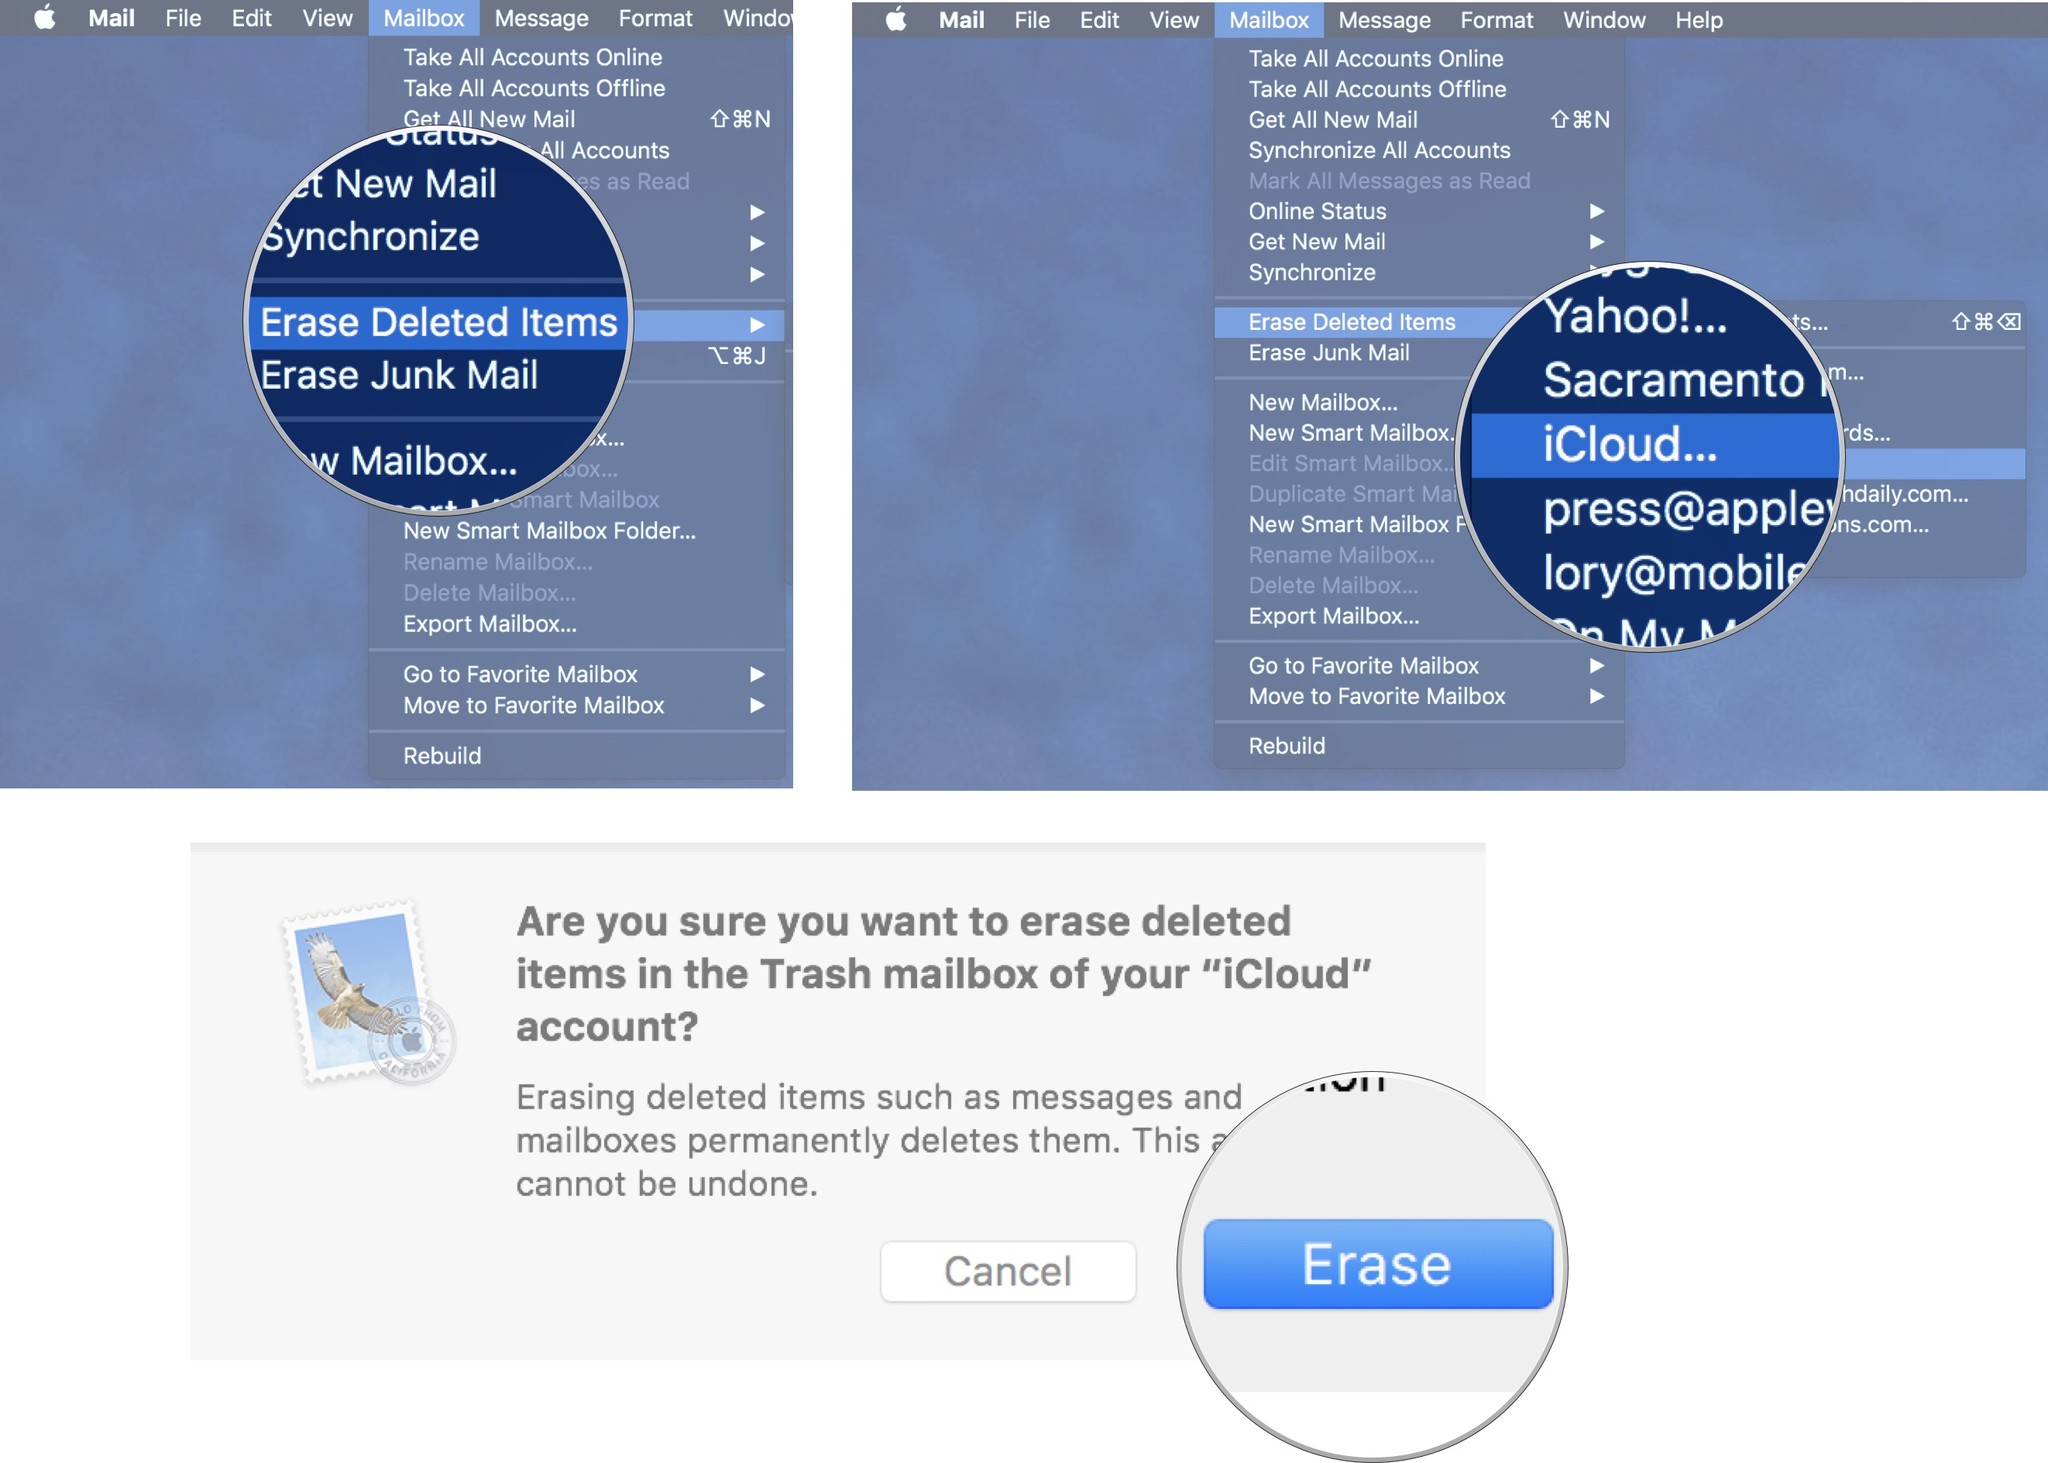 Click on erase deleted items, then select iCloud, then click erase